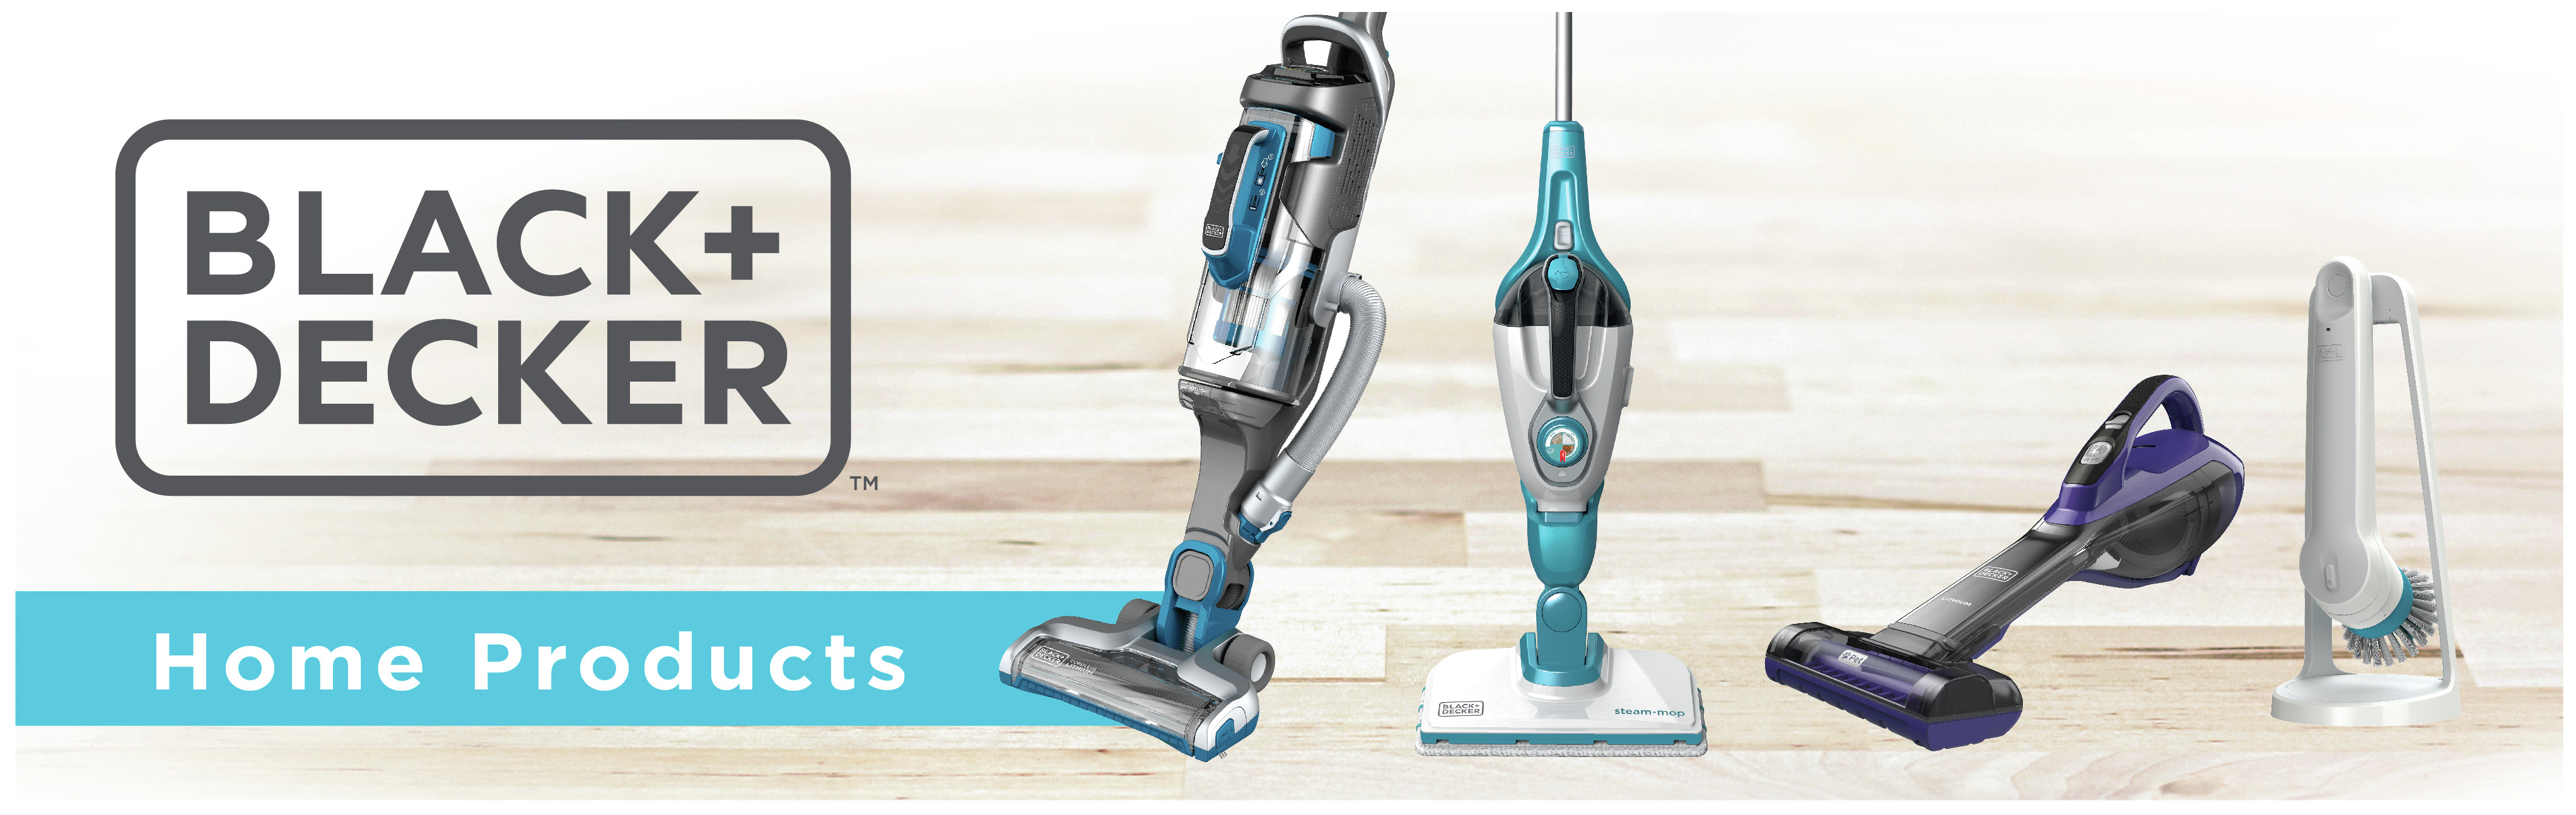 Black+Decker Home Products